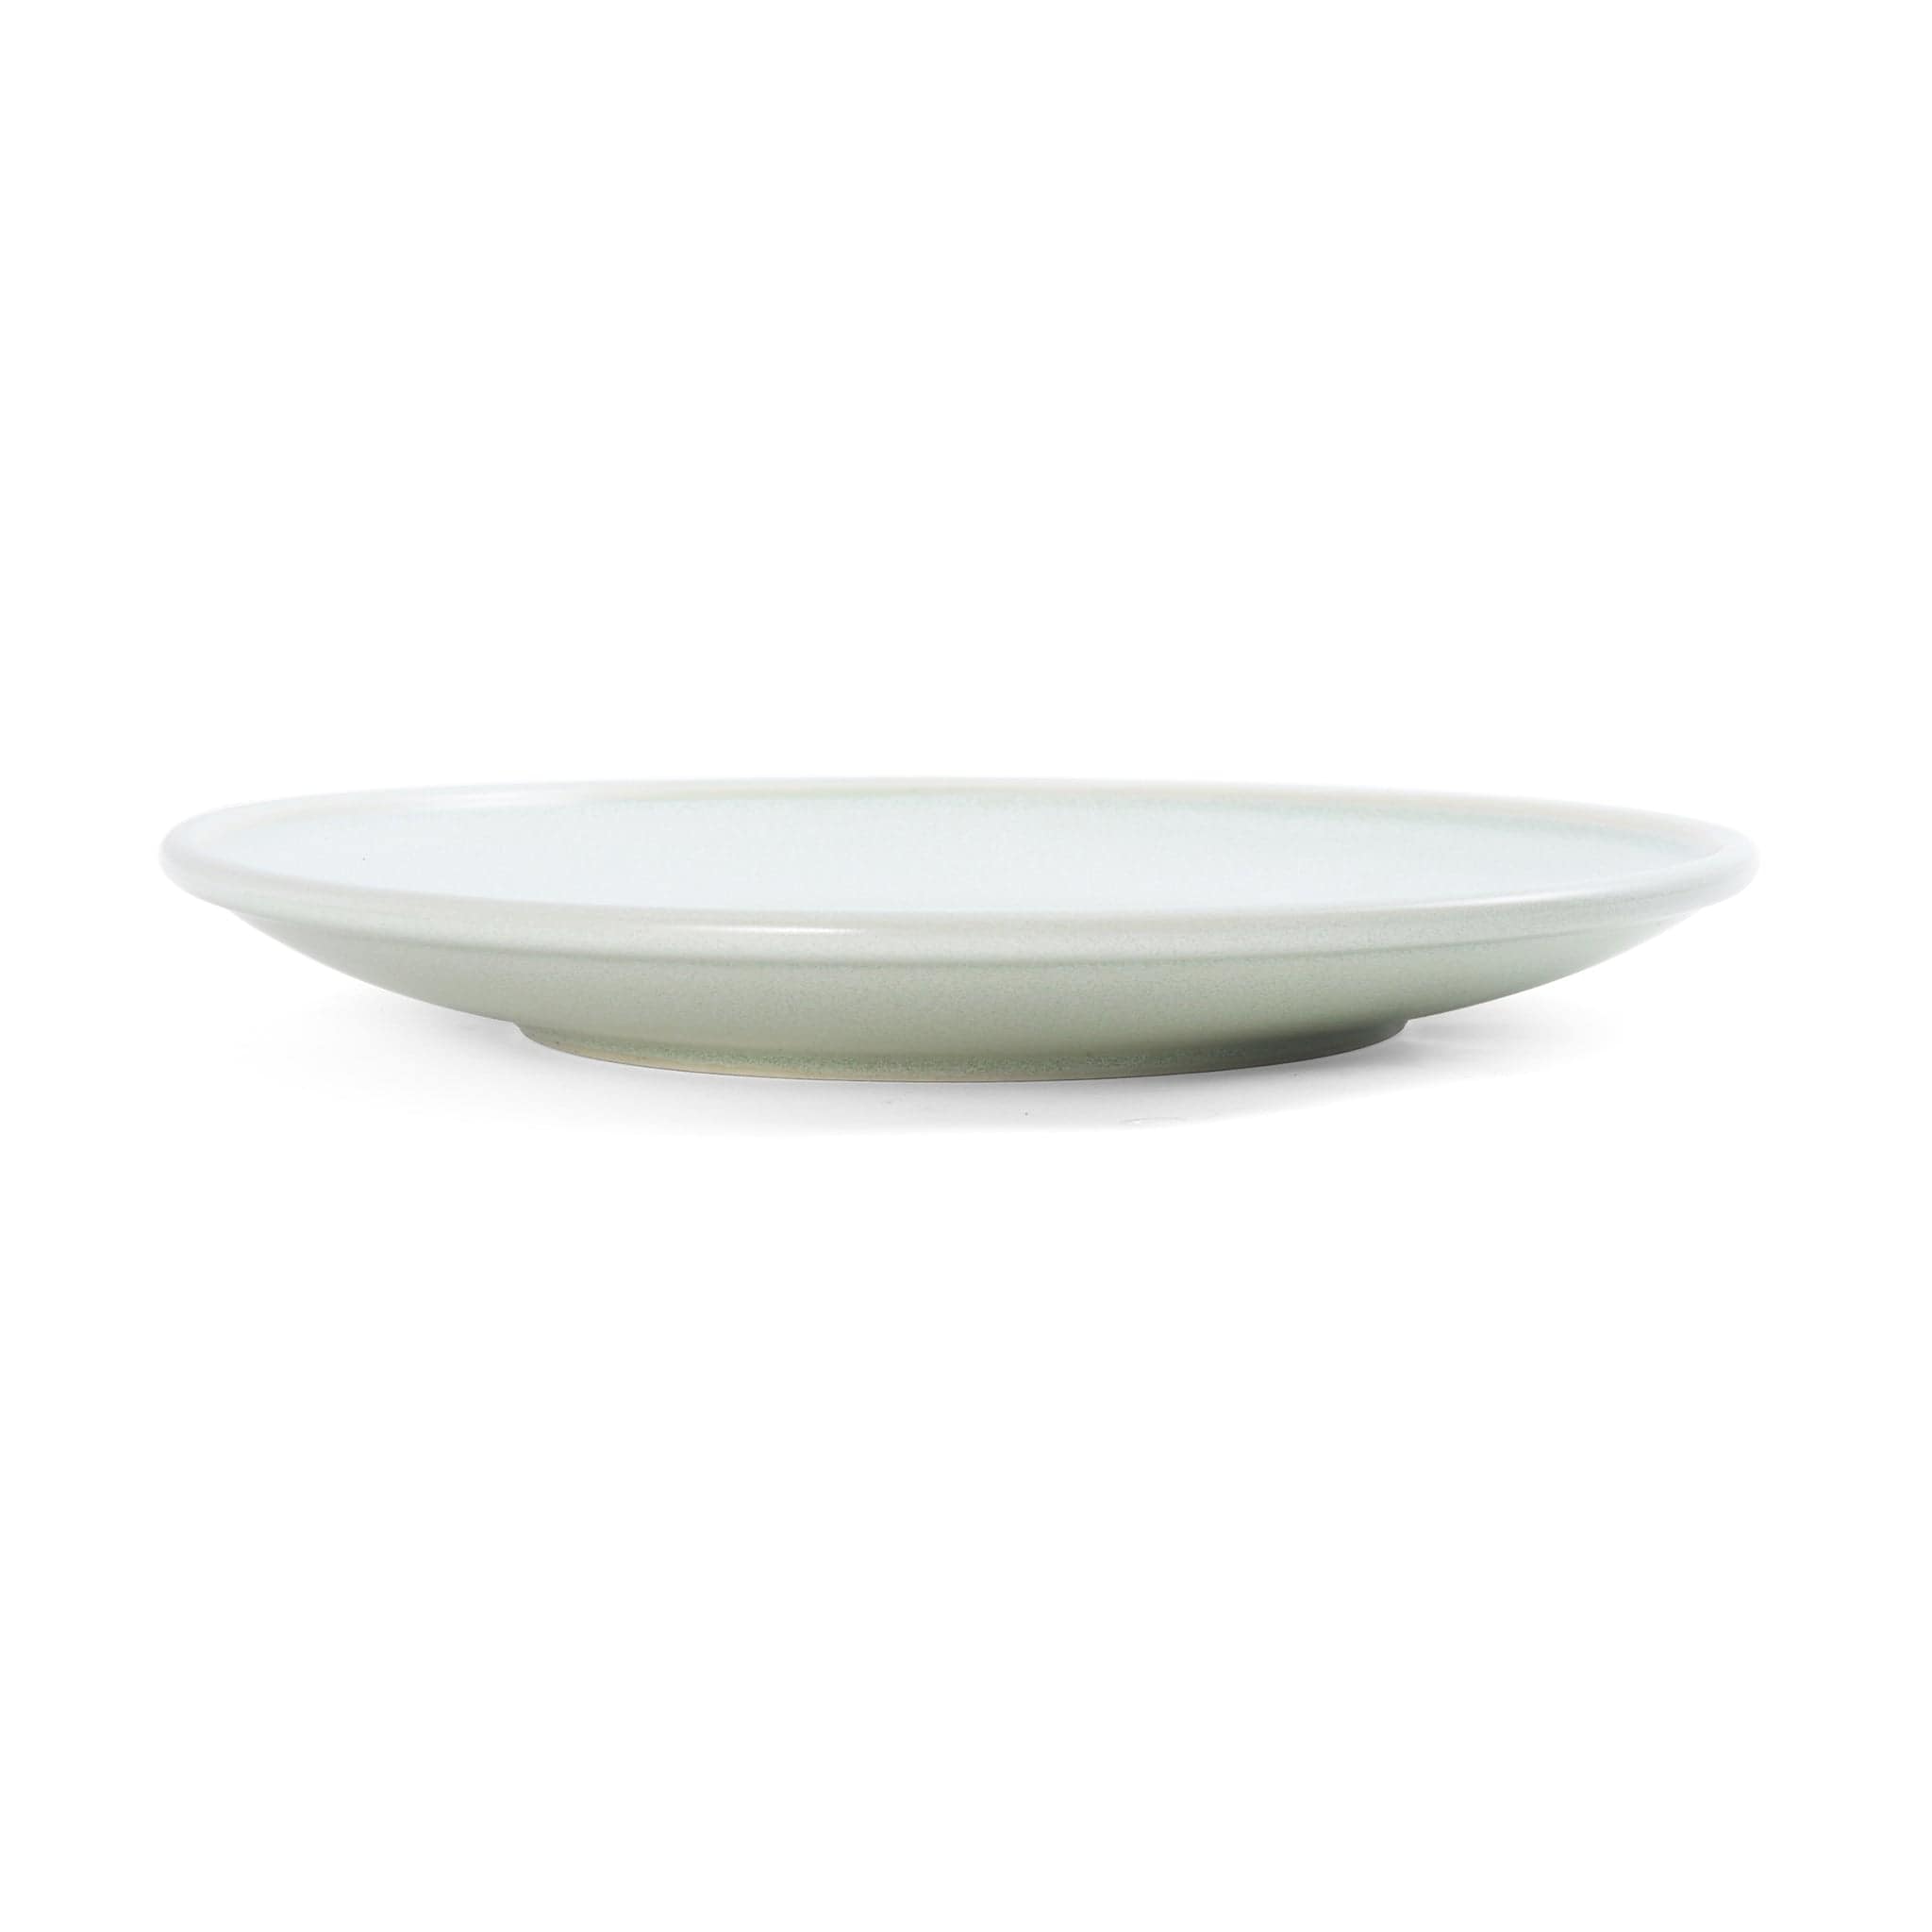 Jade Porcelain Coupe Plate 11" Green